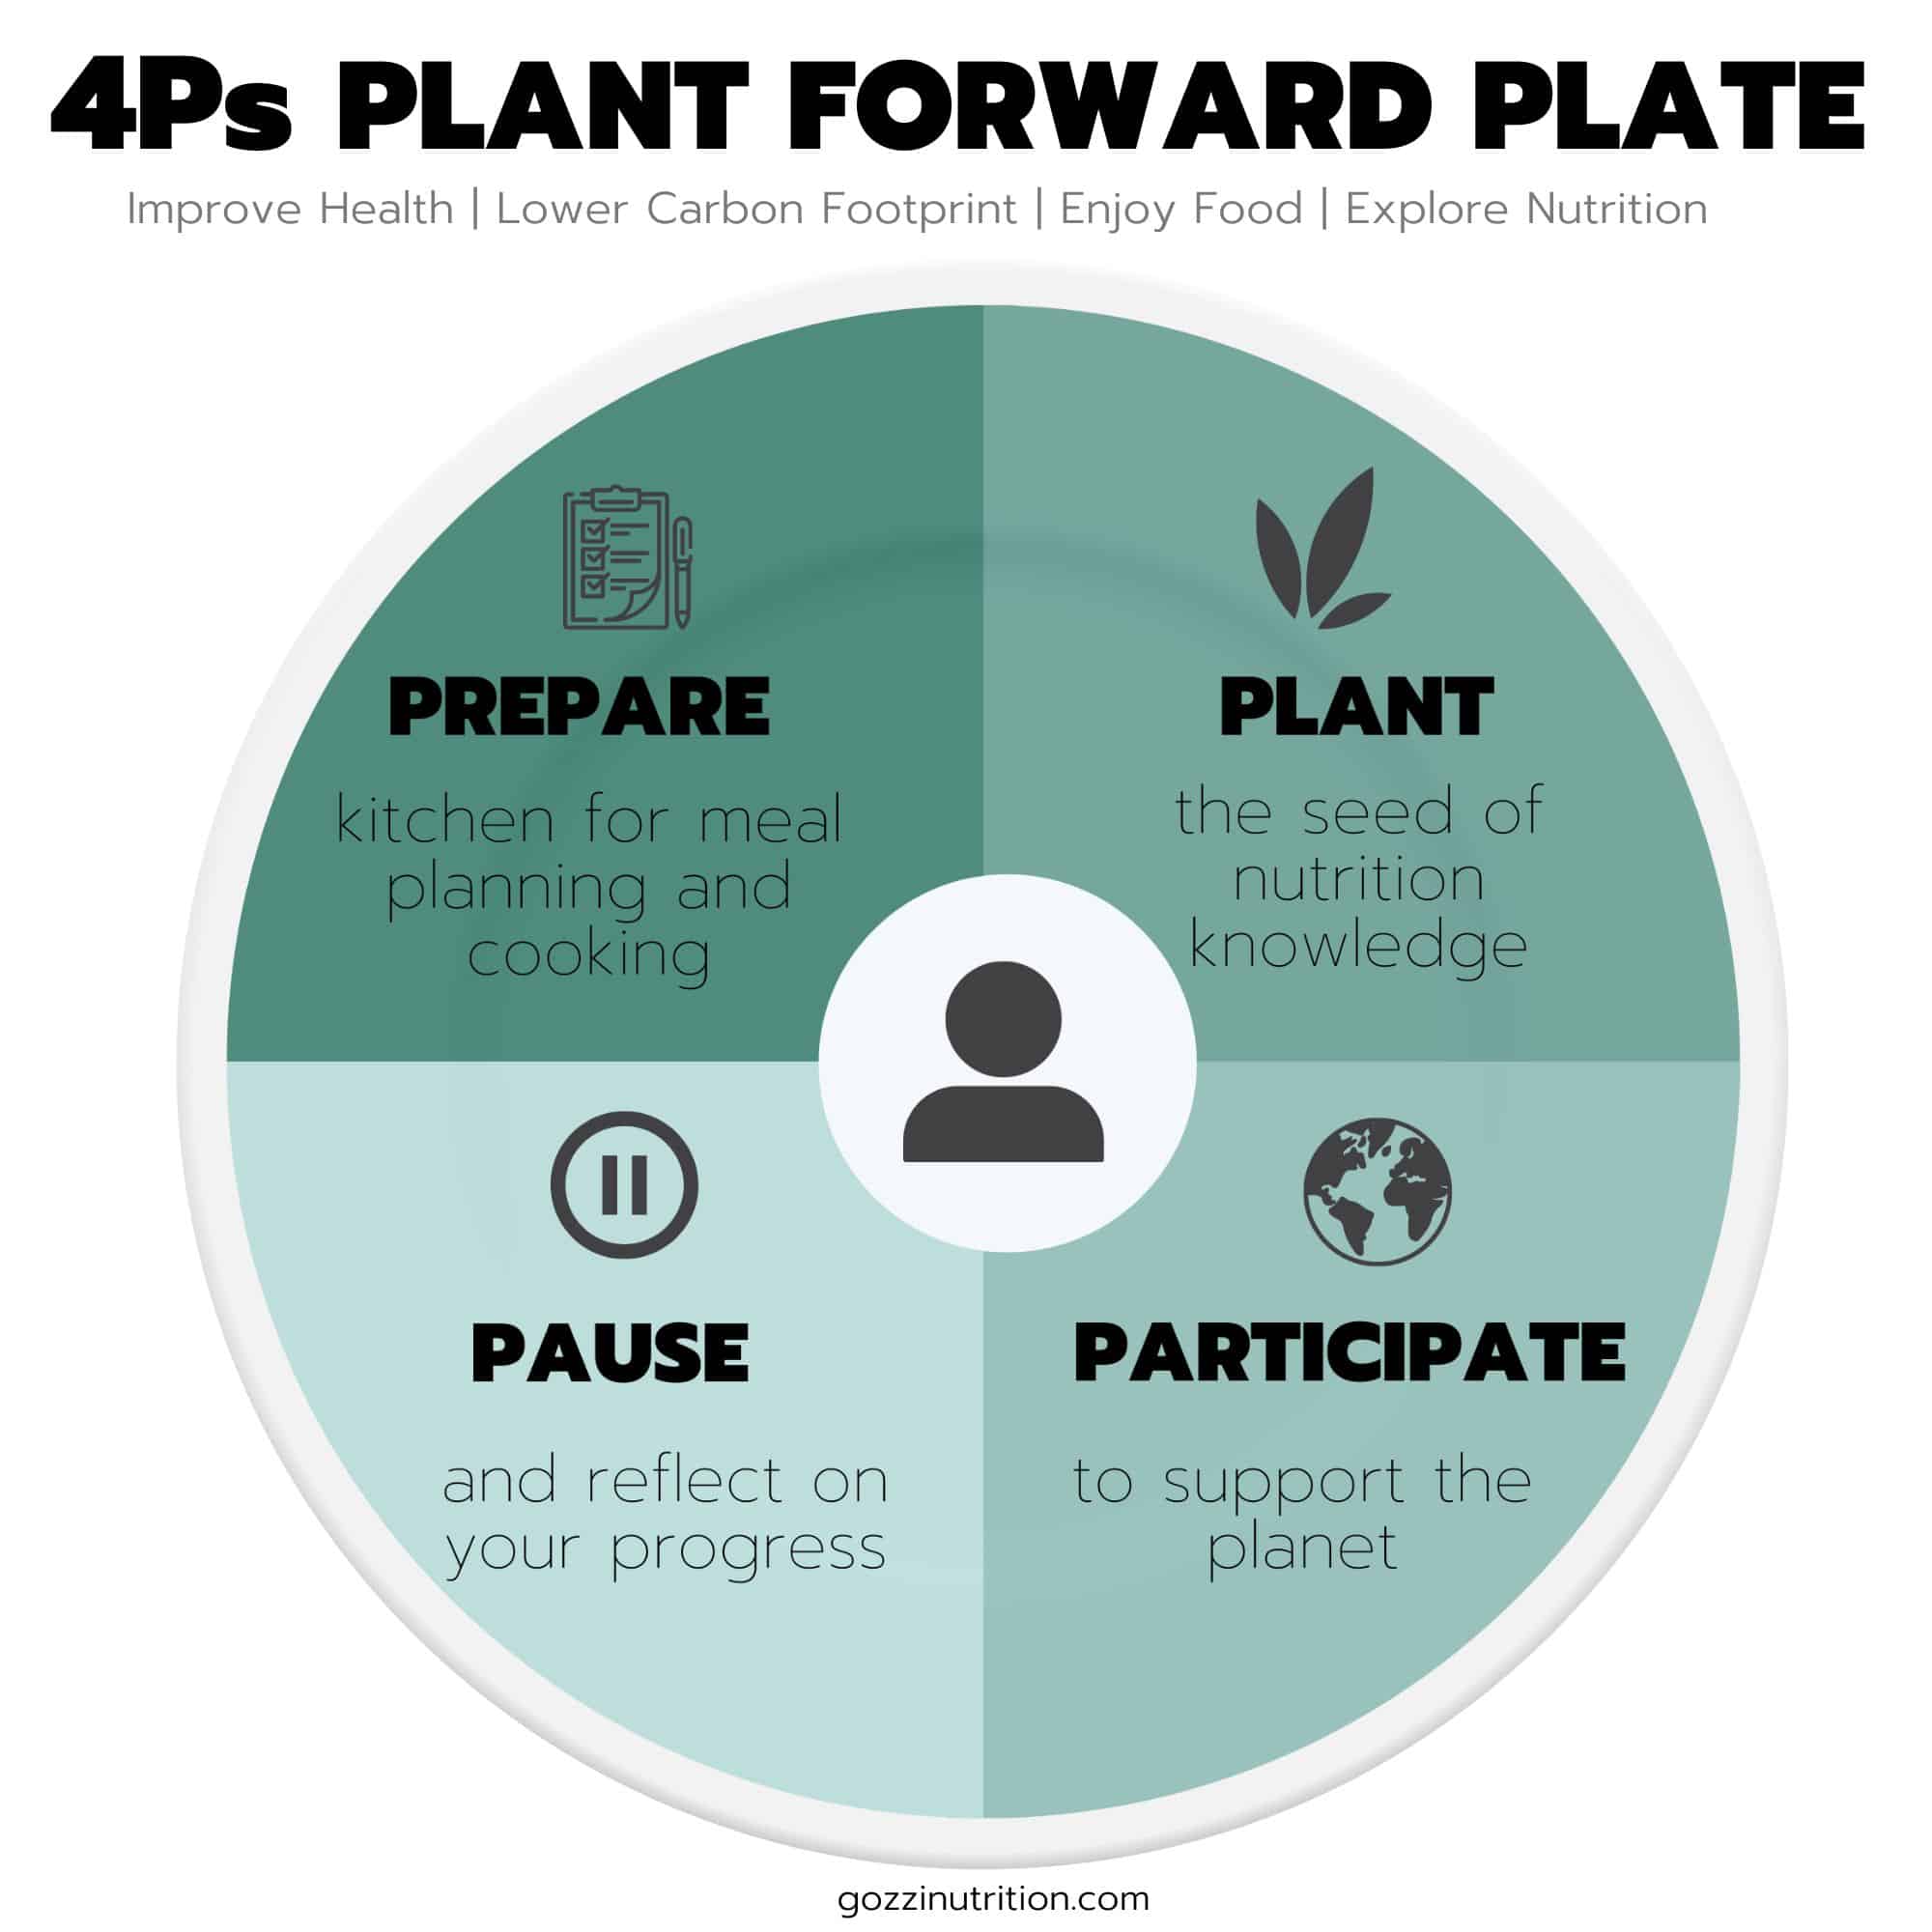 Graphic depicting the 4ps of the plant forward plate which are prepare your kitchen, plant the seed of nutrition knowledge, pause and reflect on your progress, participate to support the planet.